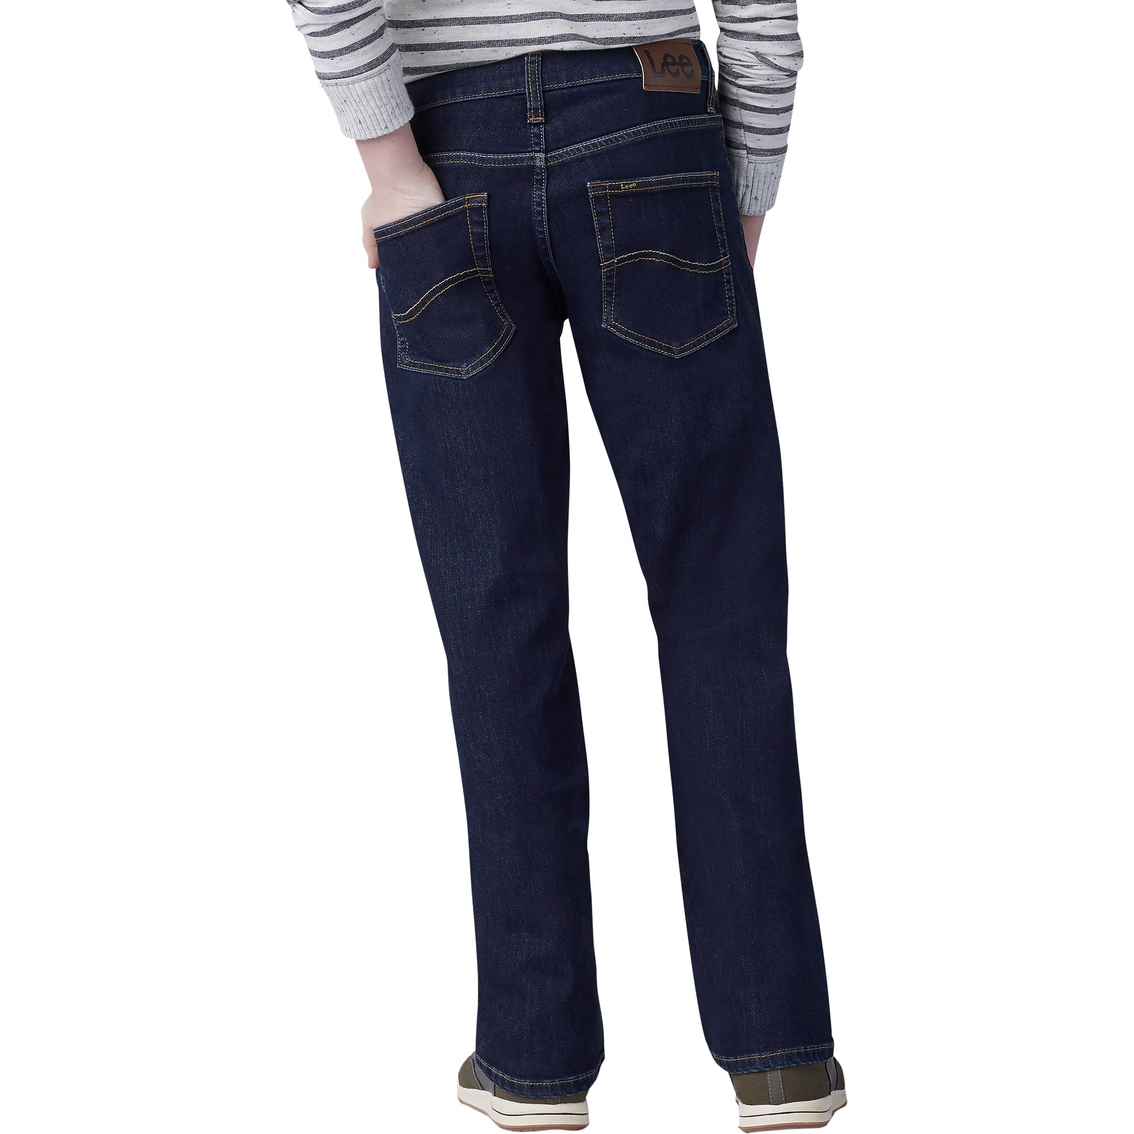 Lee Boys Boy Proof Straight Fit Jeans - Image 2 of 3